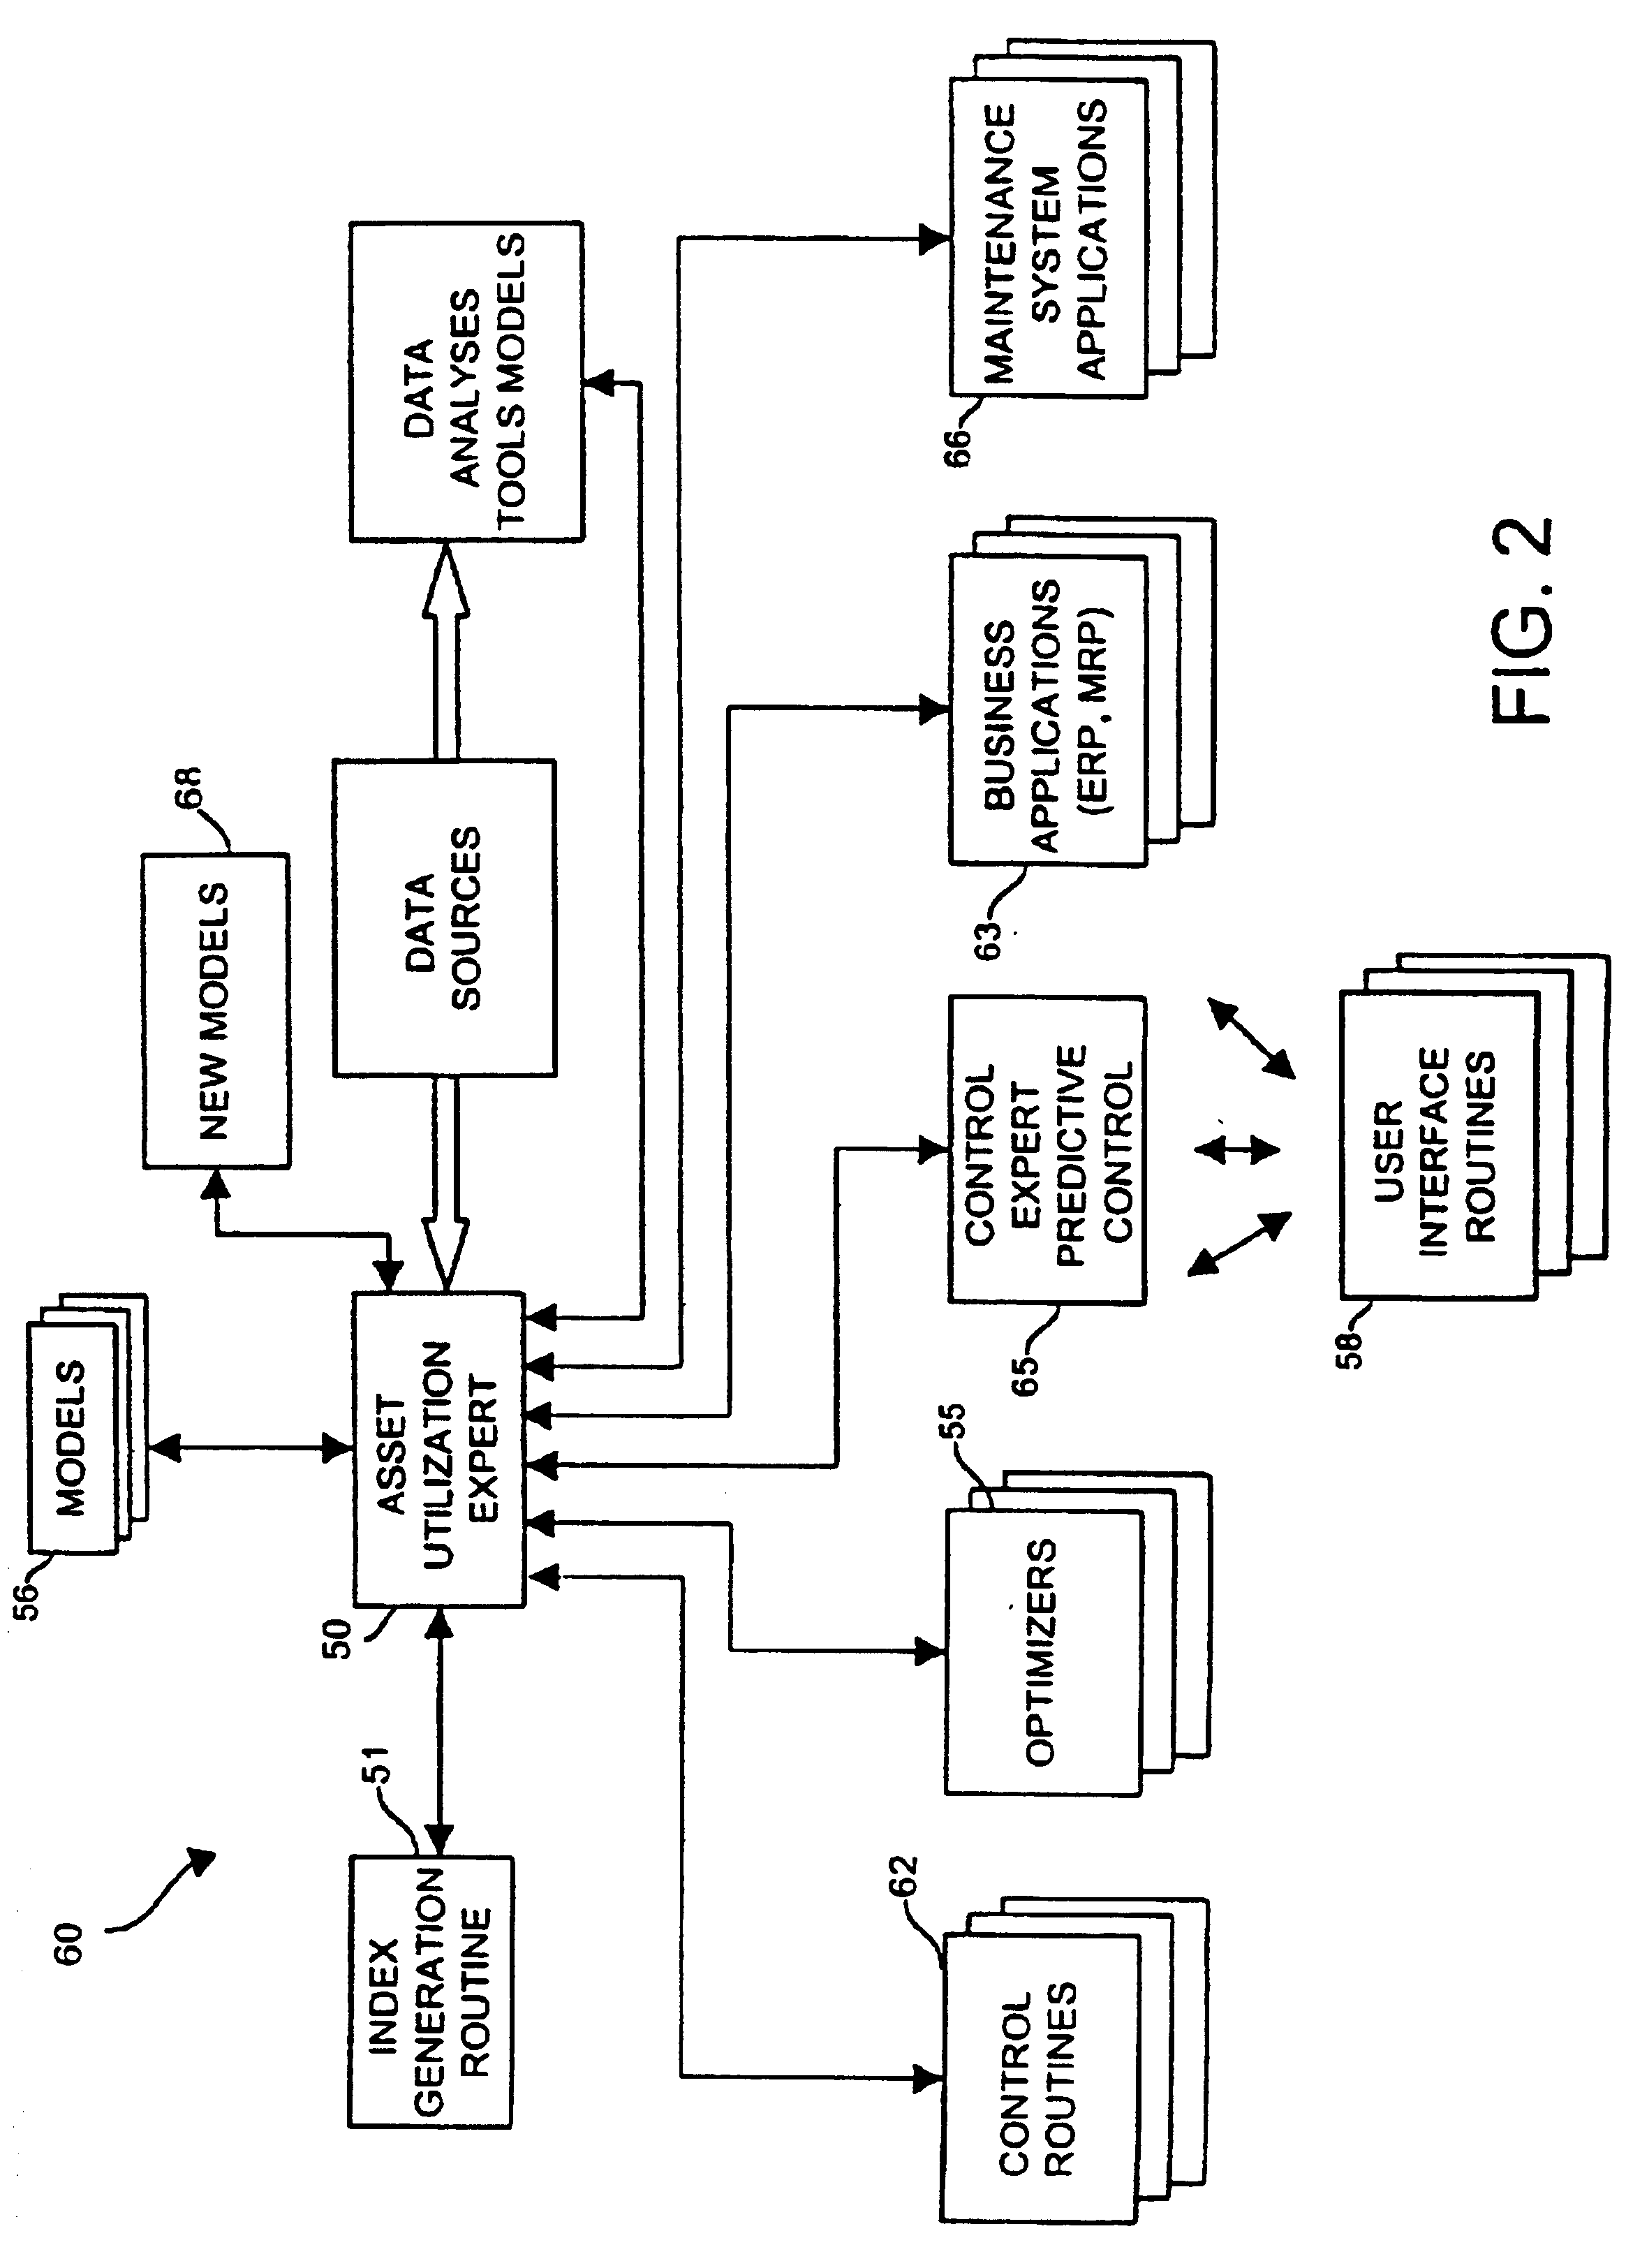 Fiducial technique for estimating and using degradation levels in a process plant